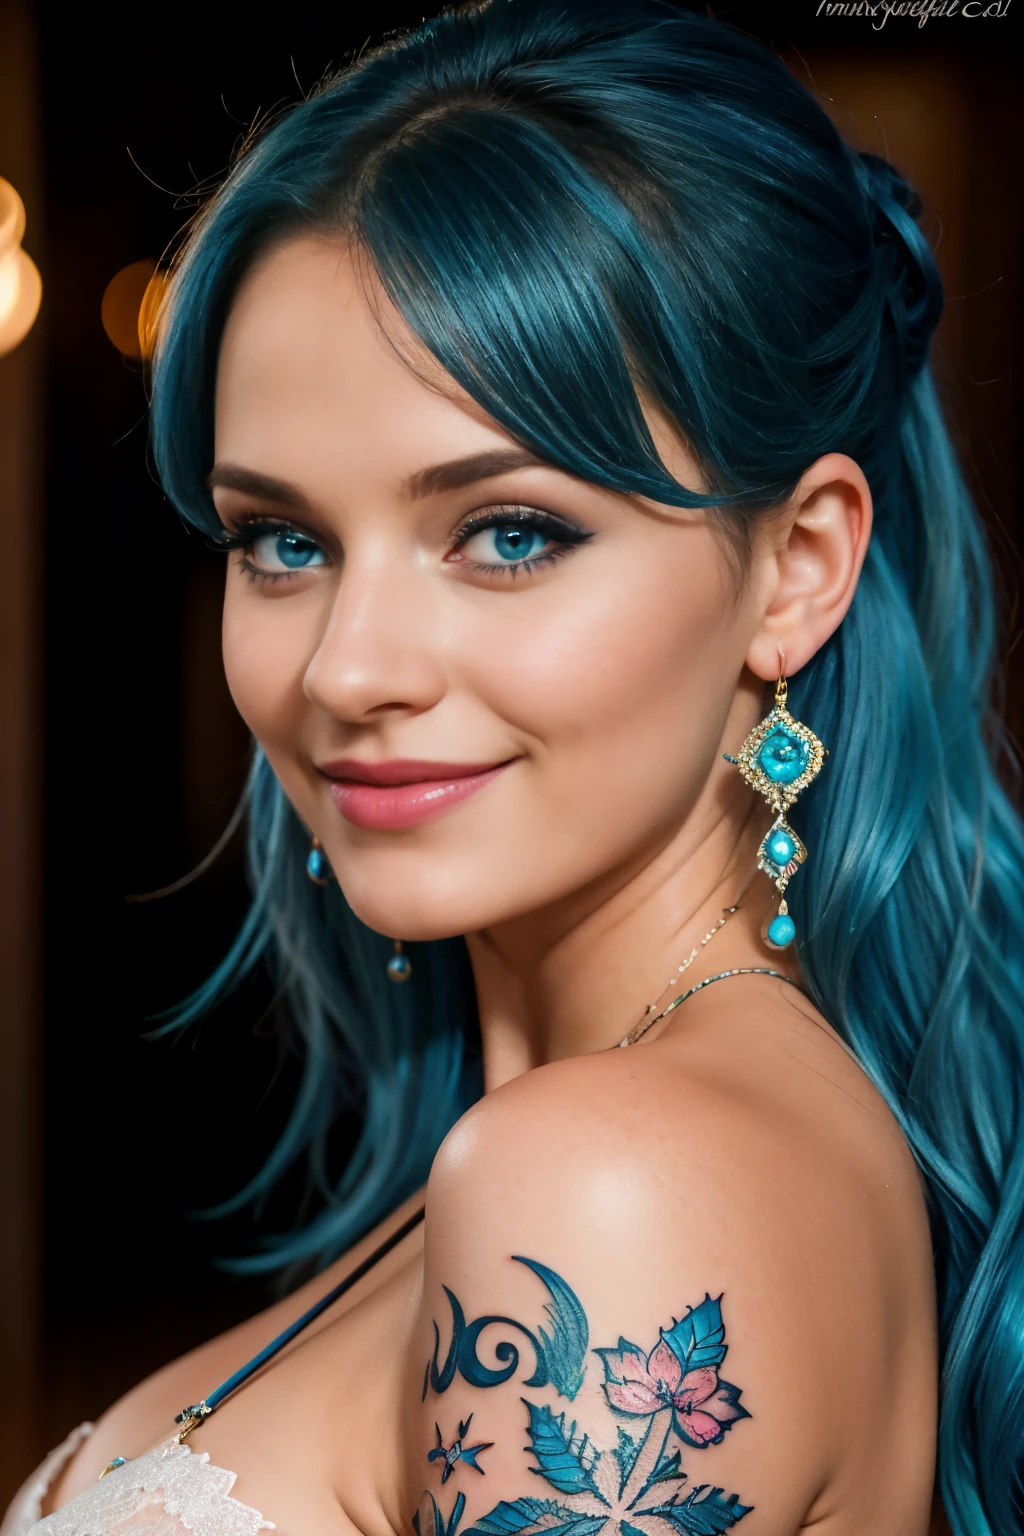 une femme de 25 ans, sexy, romantic smile, HD, 8k, masterpiece, a lot of details, blue hairs, deep look, blue eyes, pink lace lingery, tribal tattoo